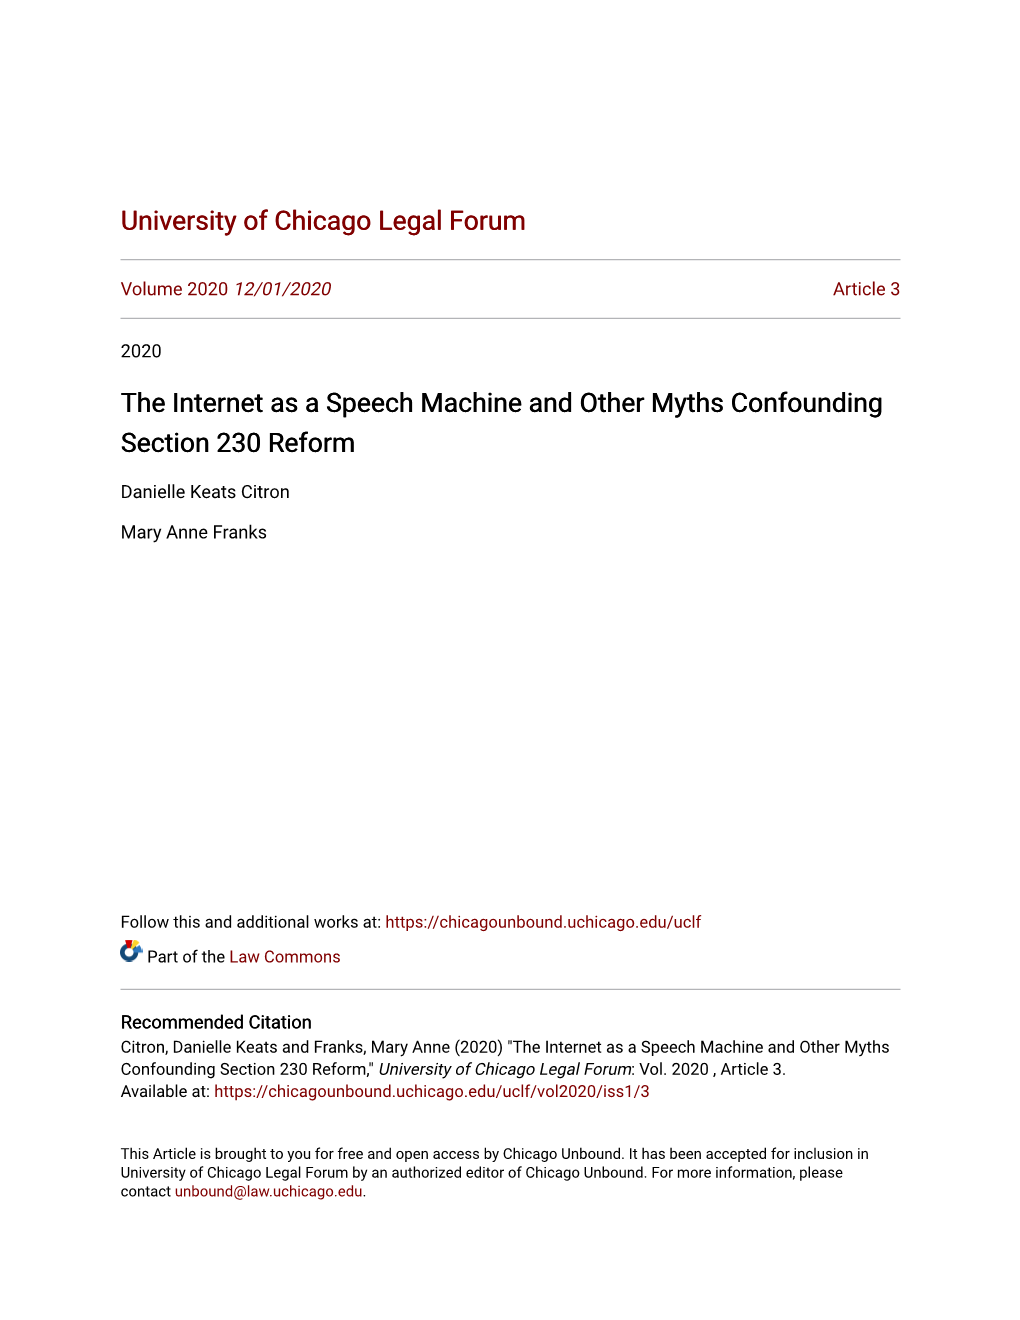 The Internet As a Speech Machine and Other Myths Confounding Section 230 Reform